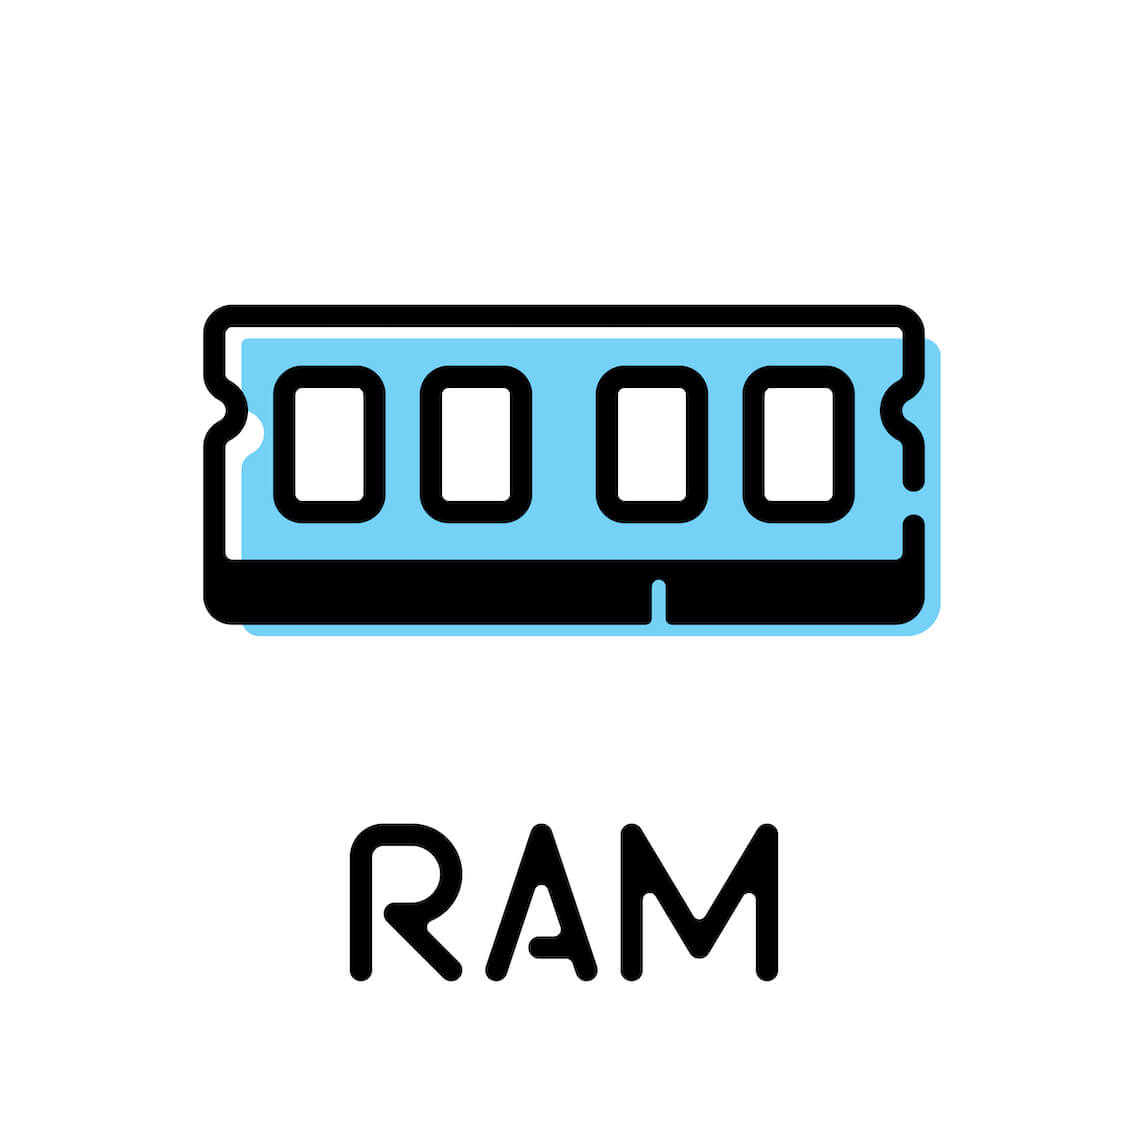 How to Check How Much RAM You Have on Windows 10 PC and MAC